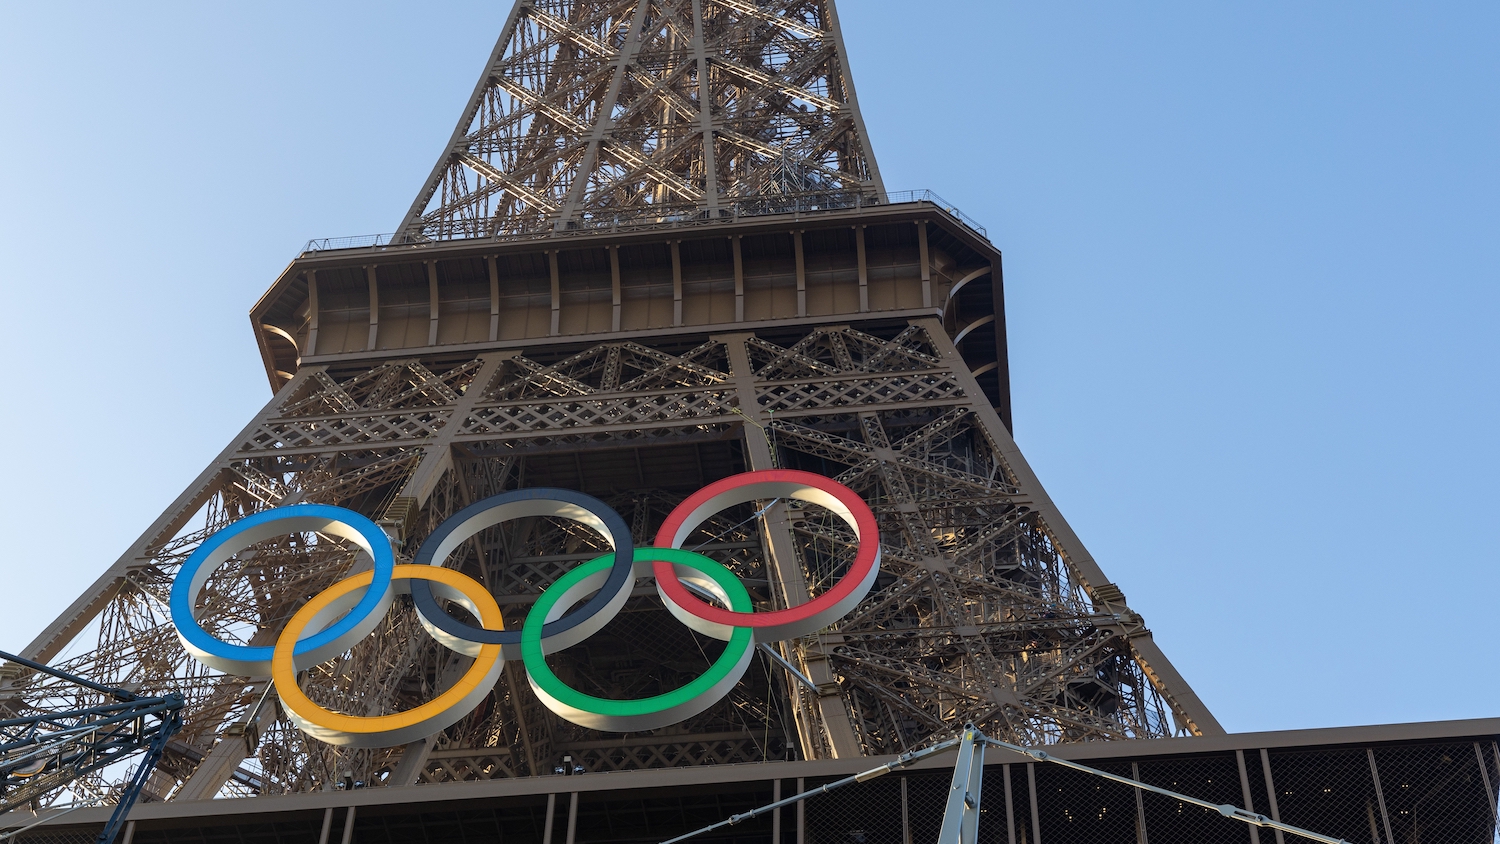 A photo of the Eiffel Tower in Paris with the Olympic rings added.